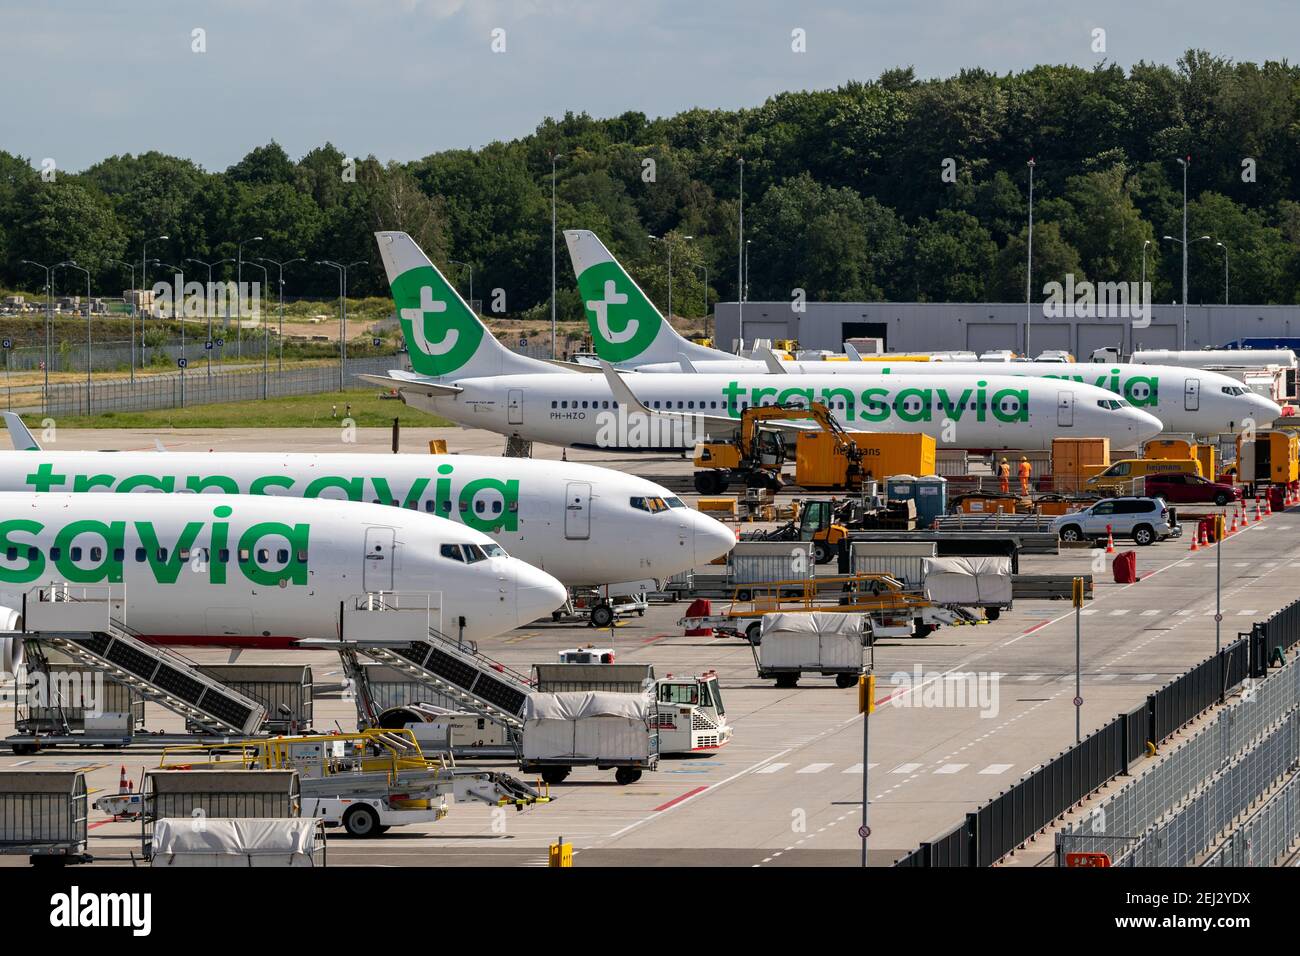 Transavia low-cost airline passenger planes on the tarmac of Eindhoven Airport. The Netherlands - October 12, 2019 Stock Photo